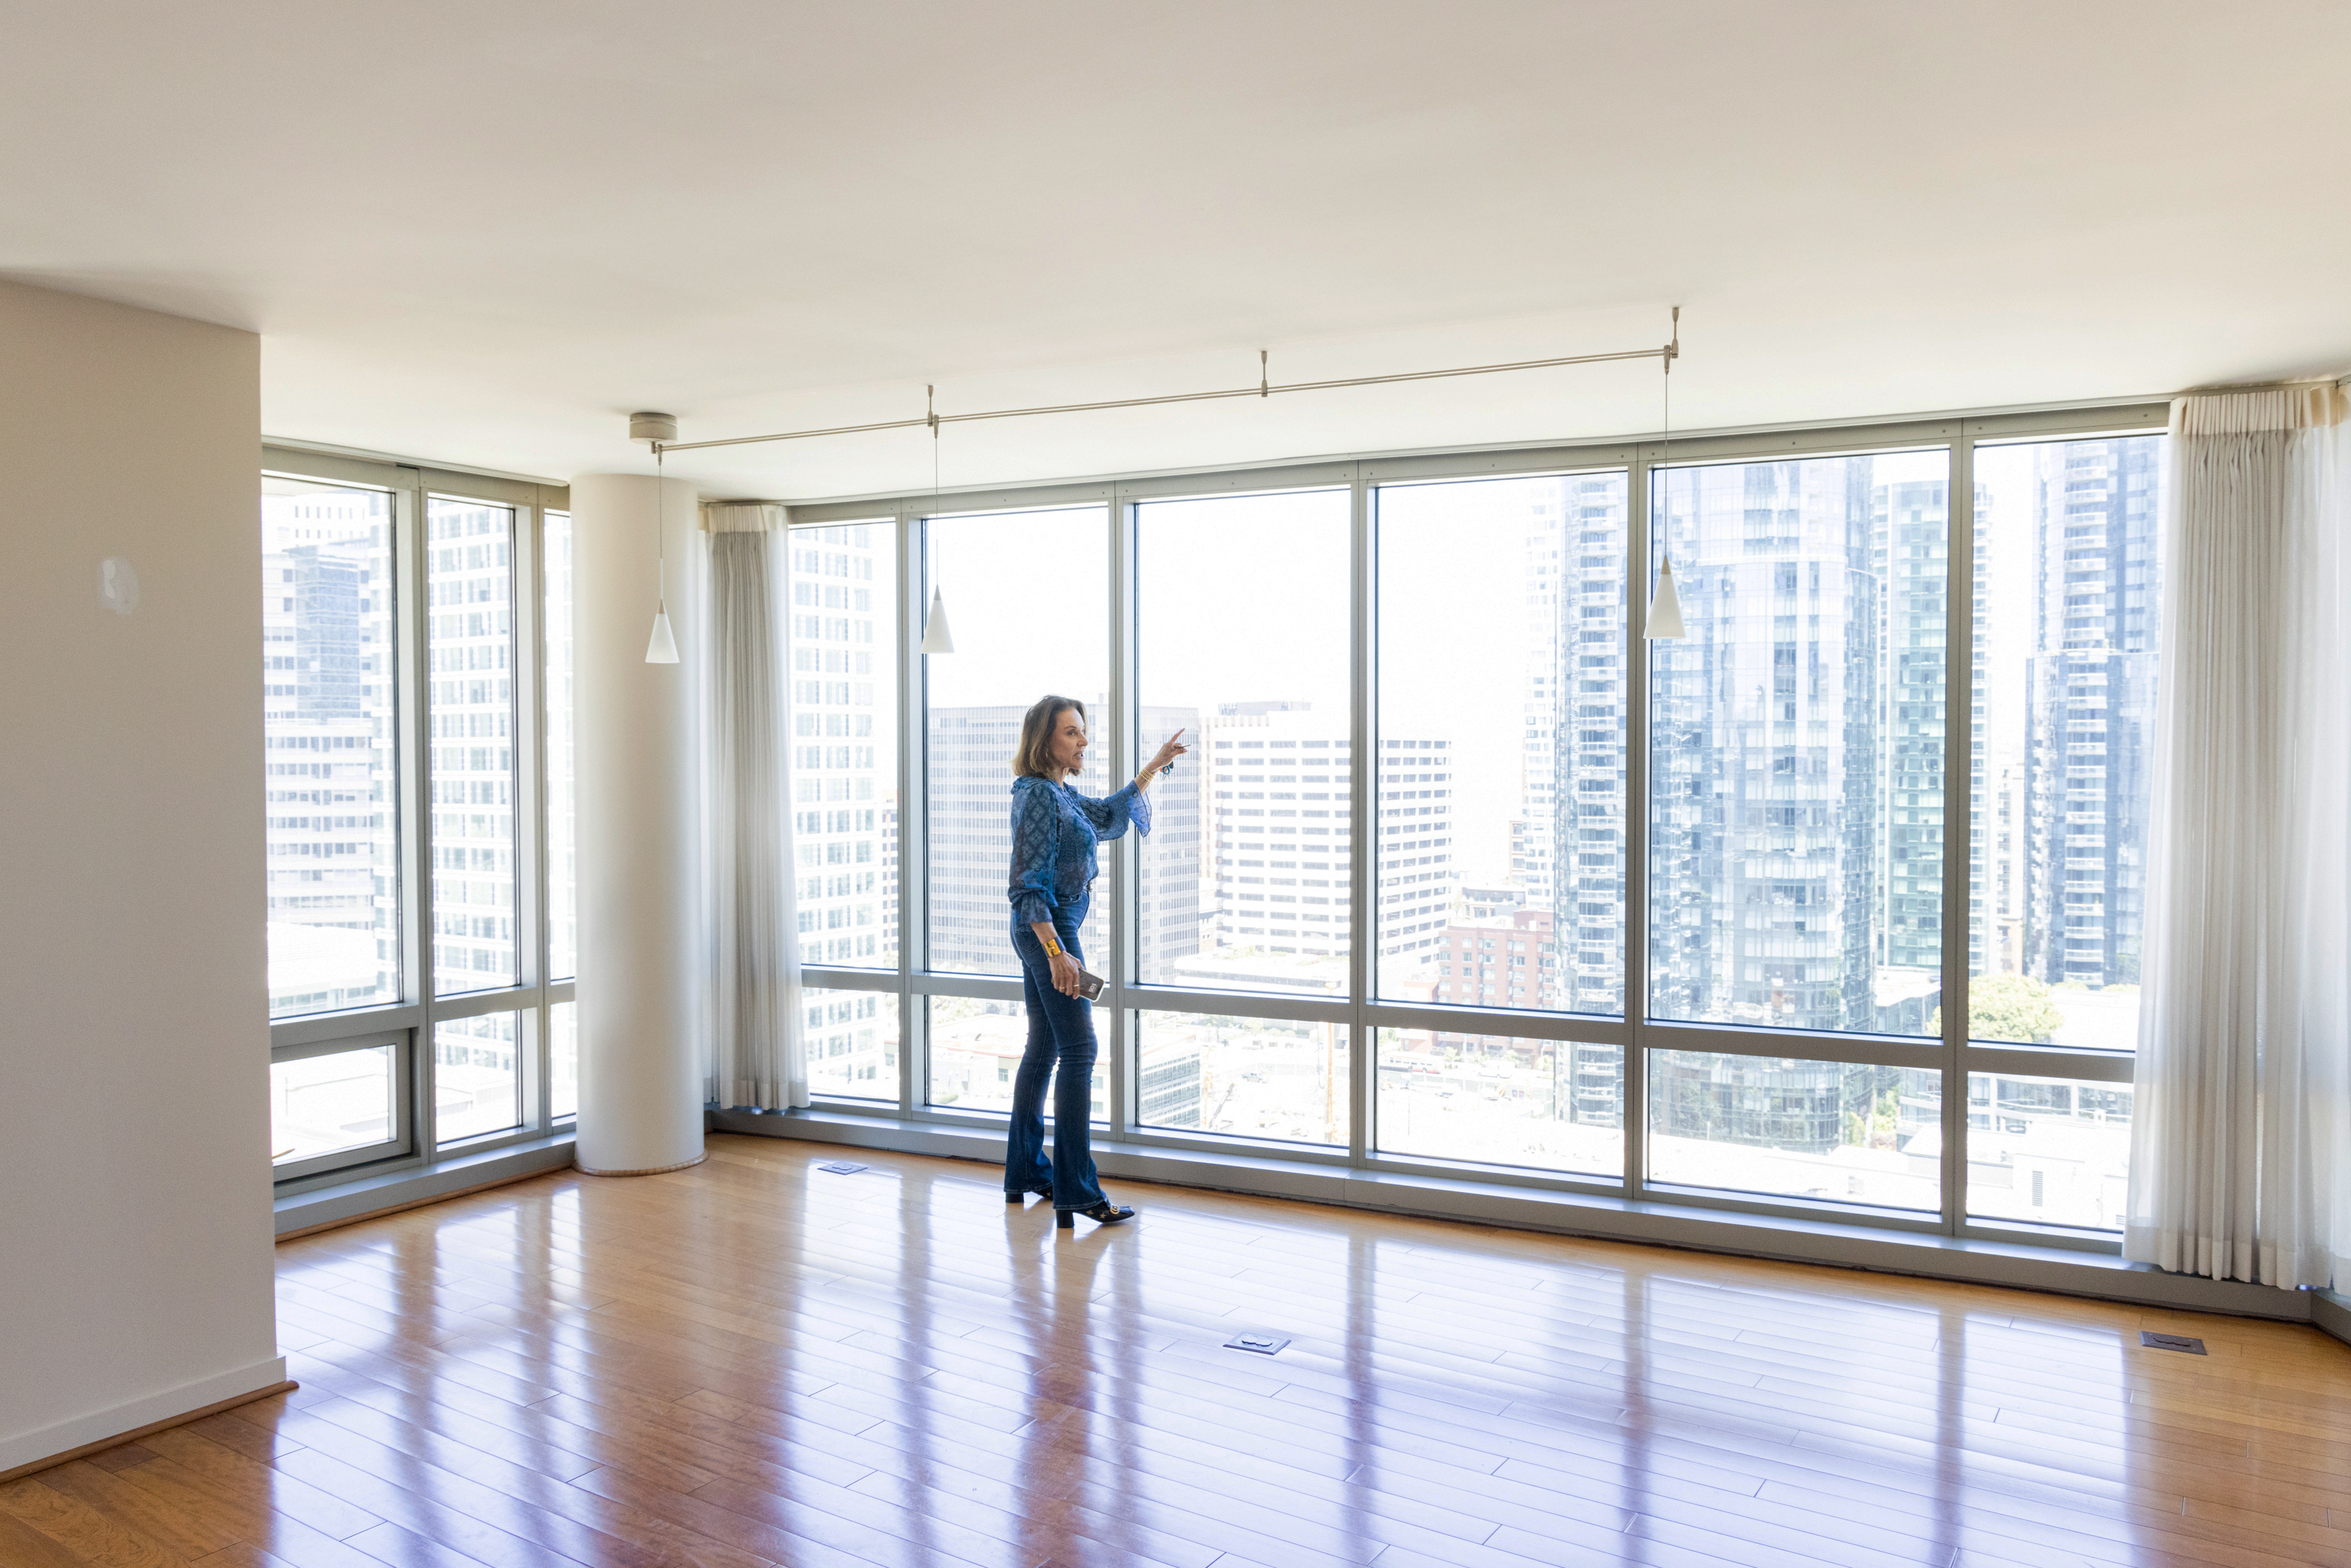 A woman stands in an empty, sunlit room with large floor-to-ceiling windows showcasing a cityscape of tall buildings, and she points towards the outside view.